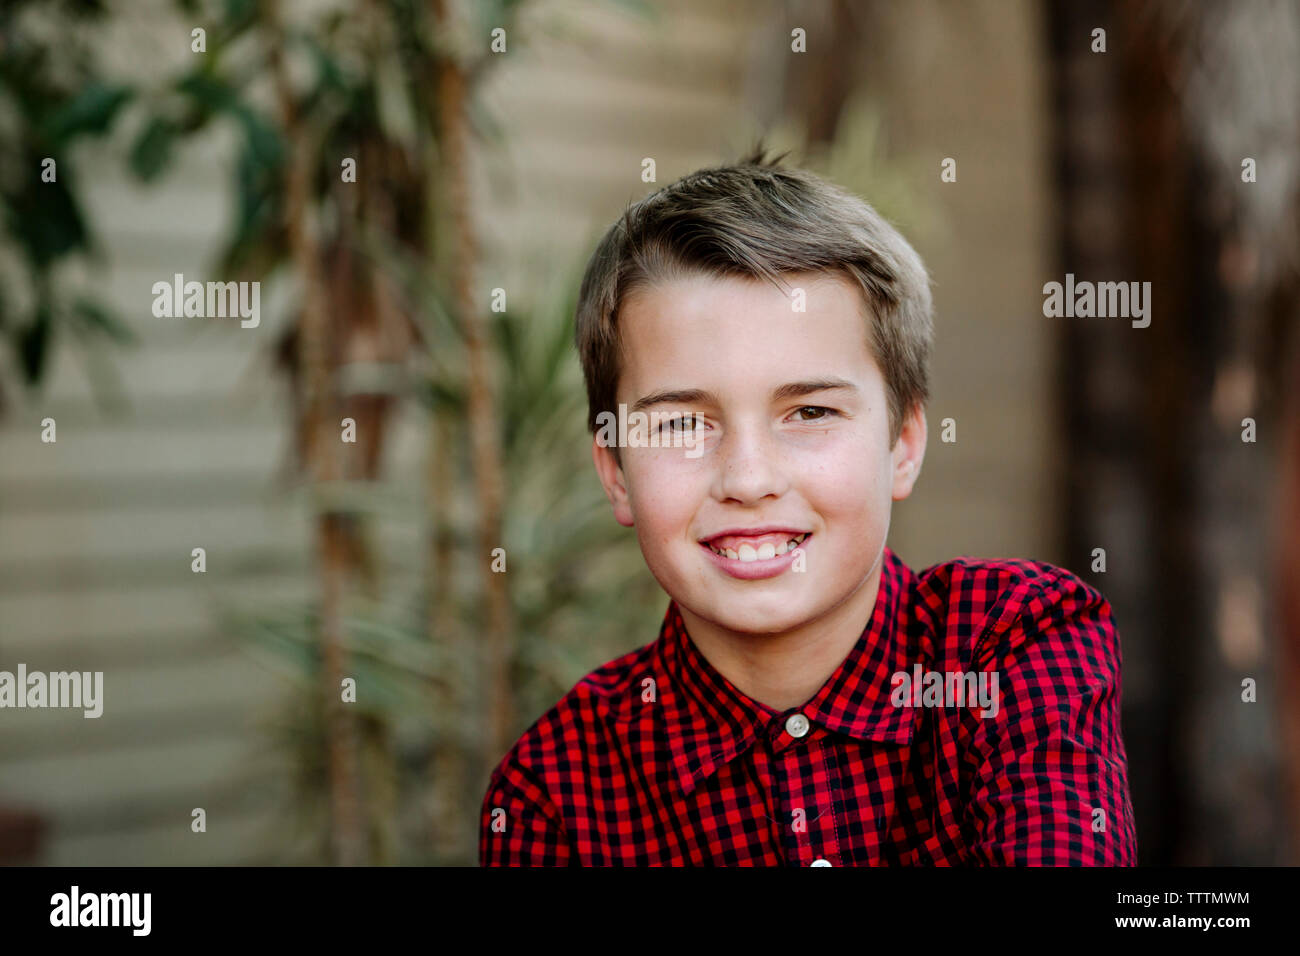 Close-up portrait of smiling boy standing against wall at yard Banque D'Images